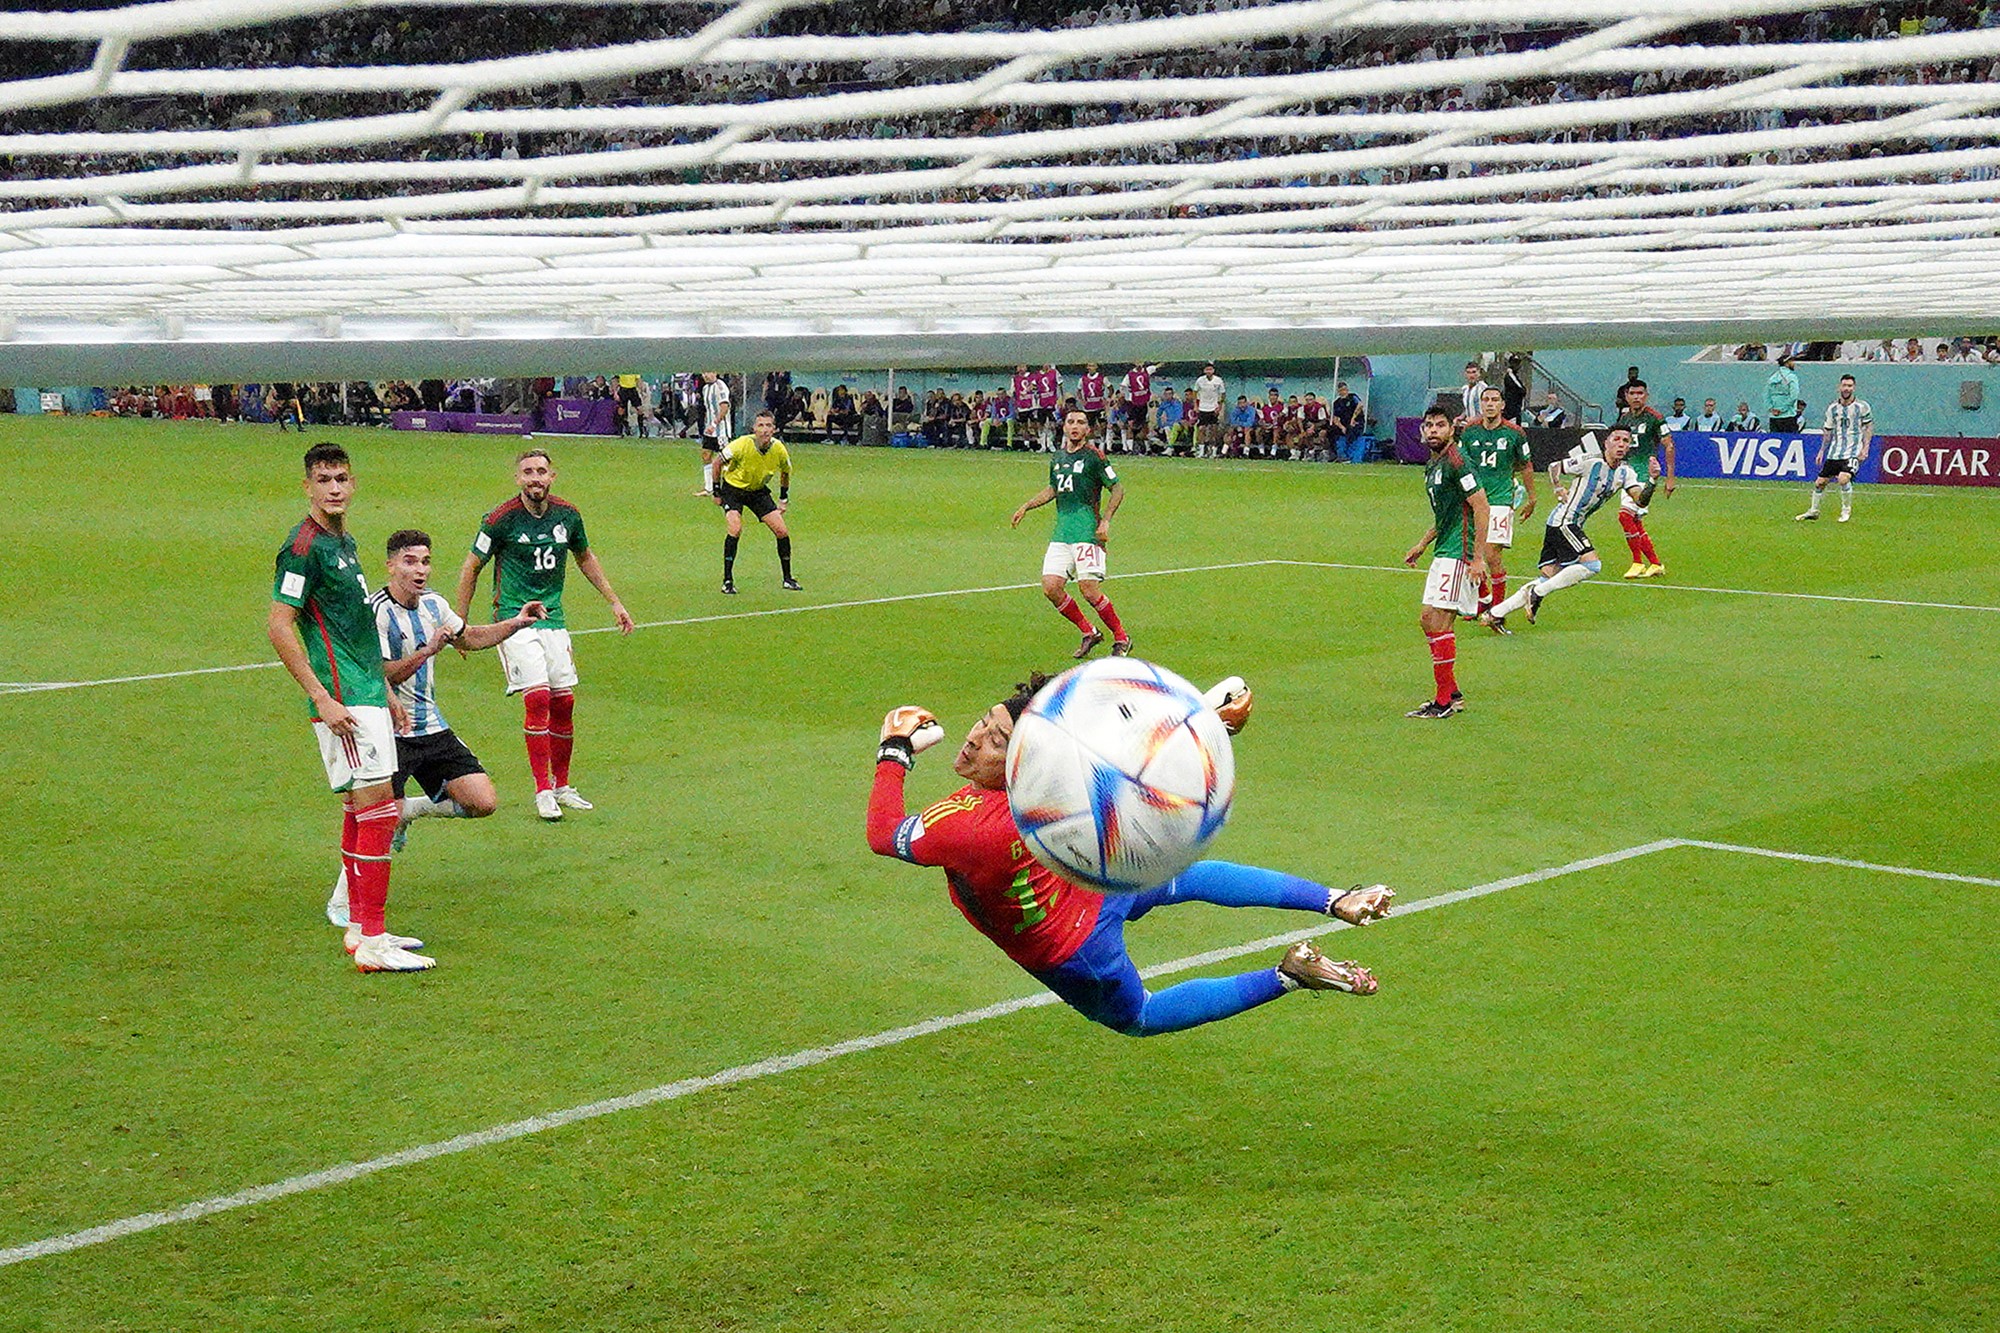 The ball flies past Mexican keeper Guillermo Ochoa for a goal from Argentina's Enzo Fernandez